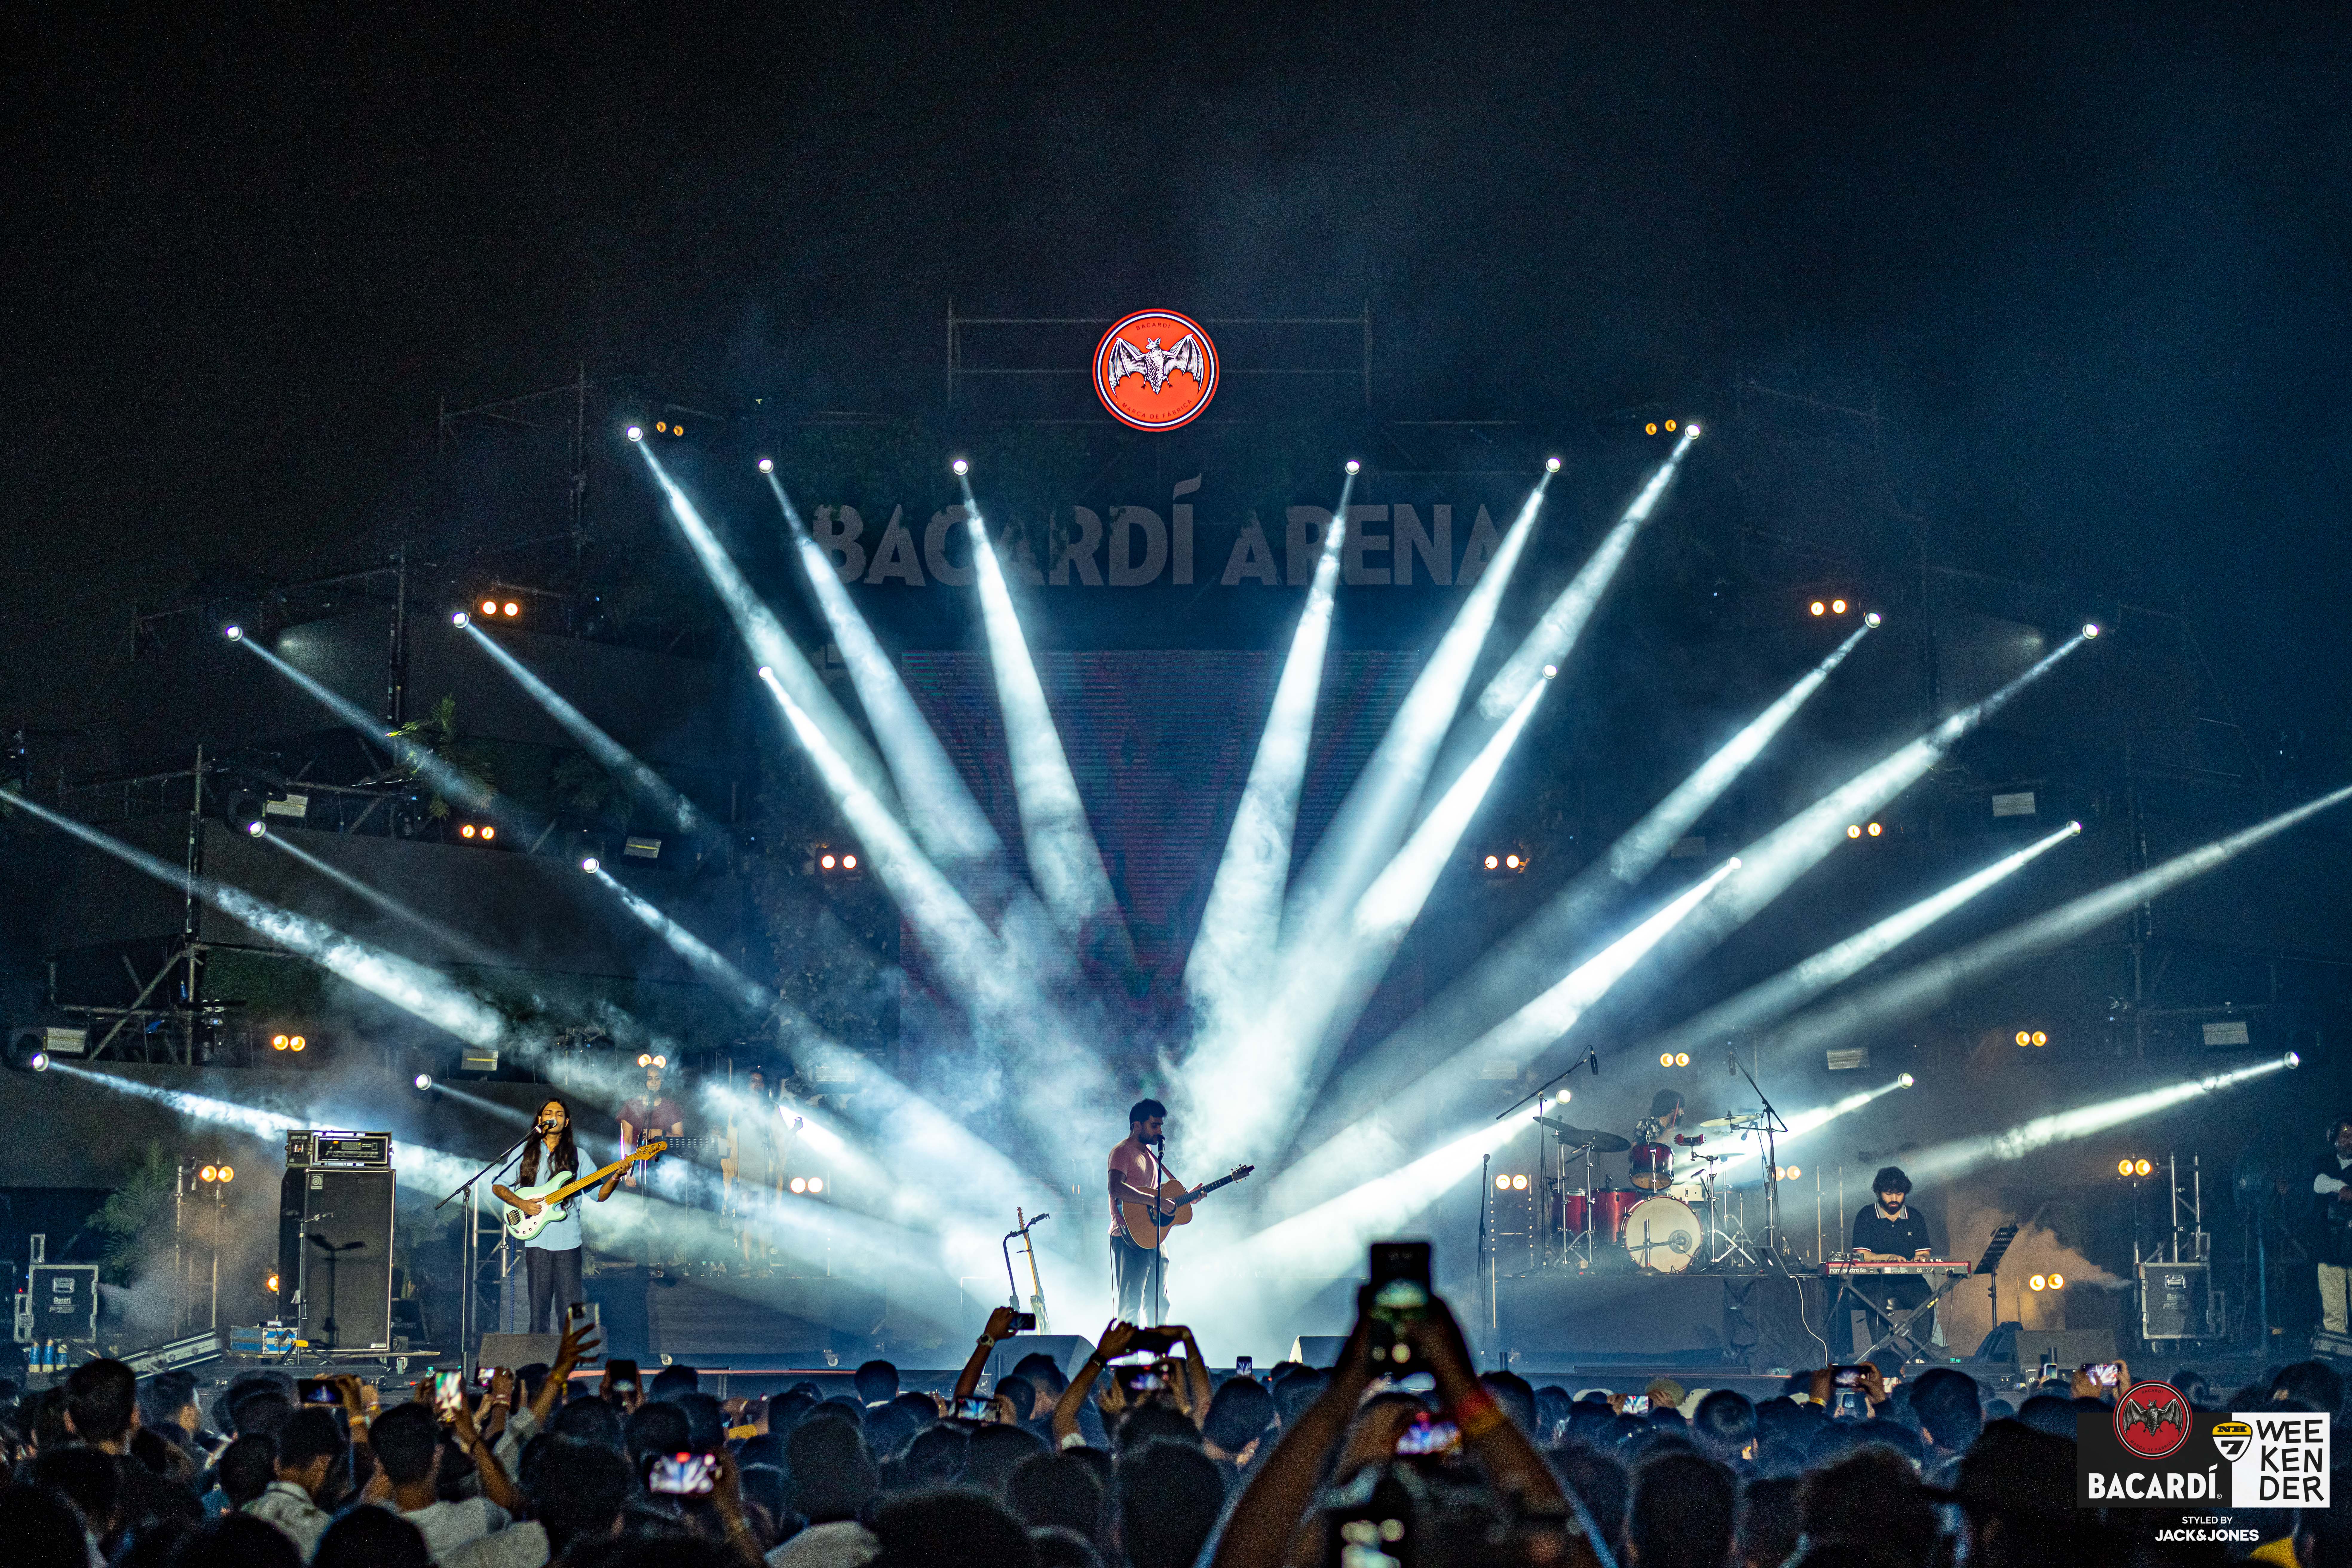 ‘IT’S A WRAP’ for India’s happiest music festival BACARDÍ NH7 WEEKENDER